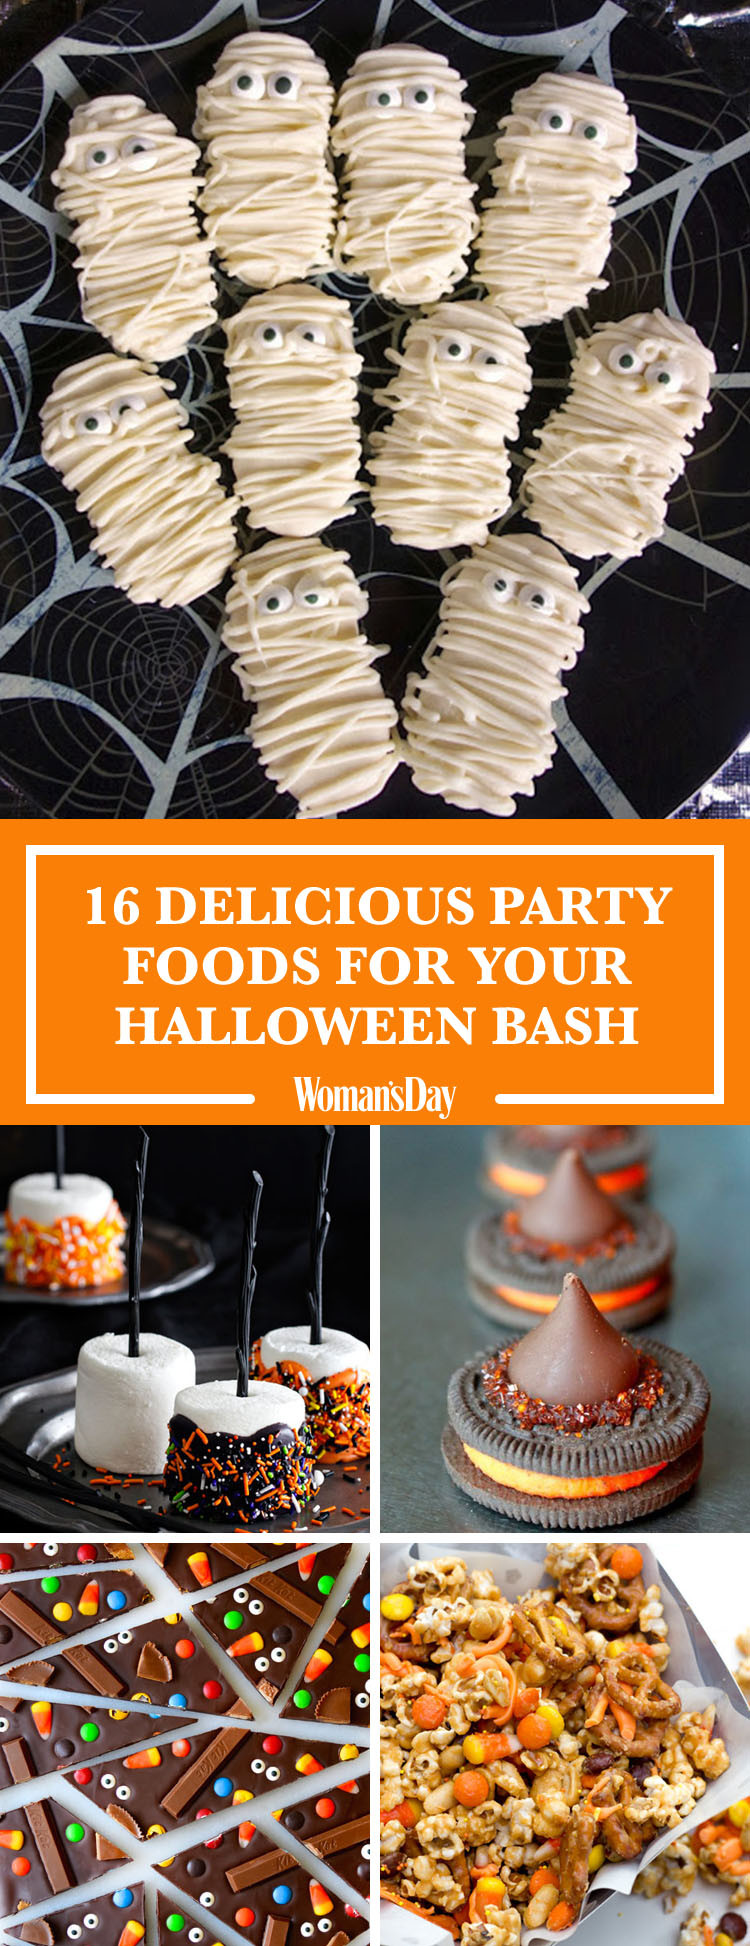 Cute Halloween Food Ideas For Party
 22 Easy Halloween Party Food Ideas Cute Recipes for